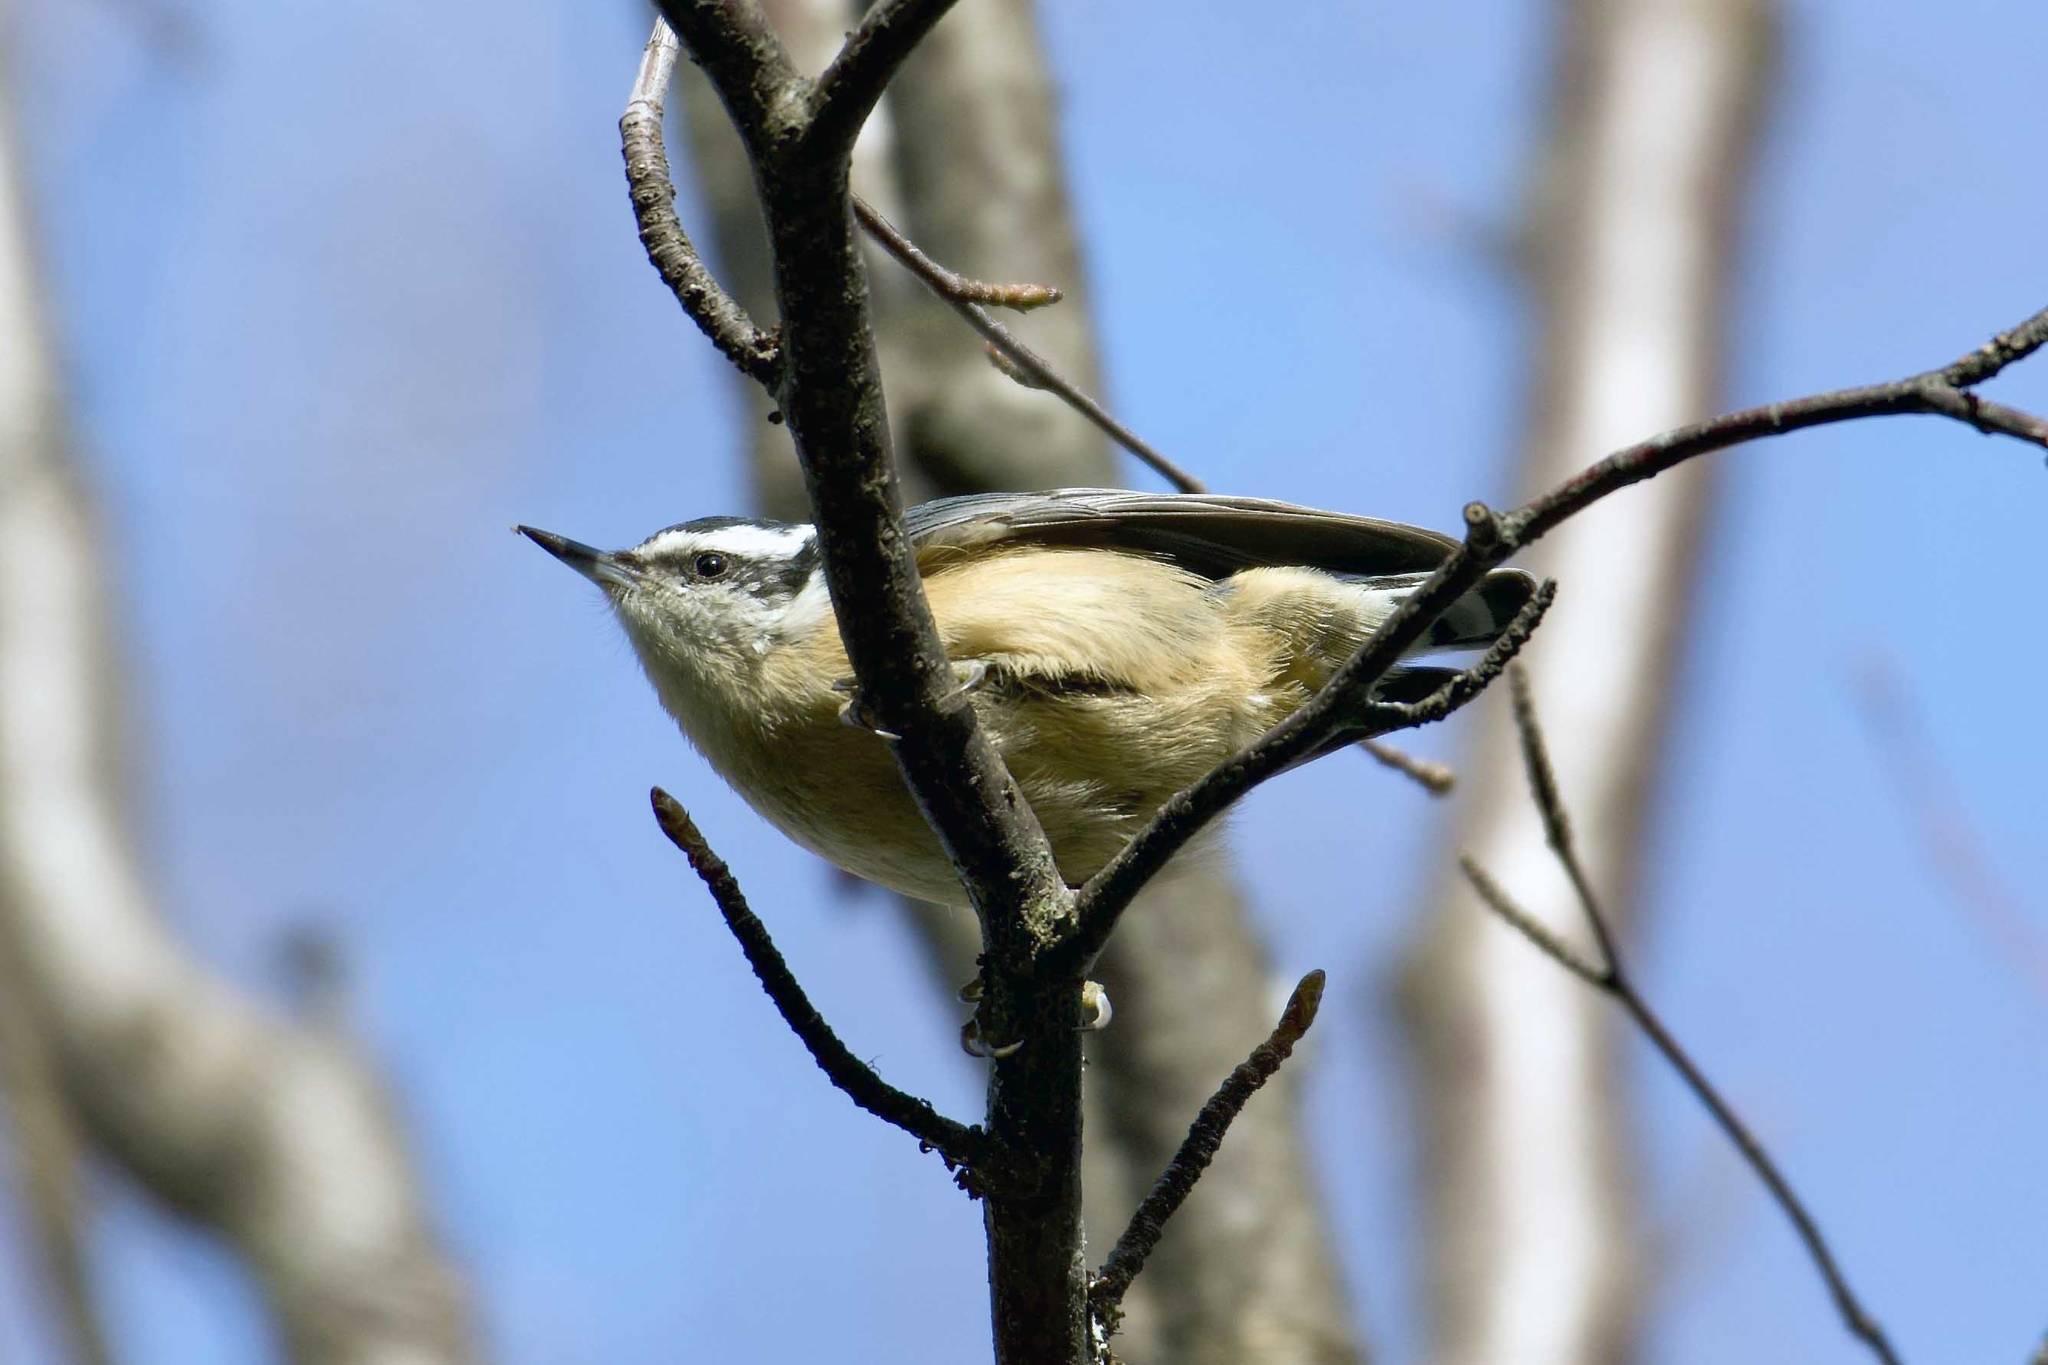 The red-breasted nuthatch is one of our common resident bird species. (Photo provided by Kyla Canterbury)